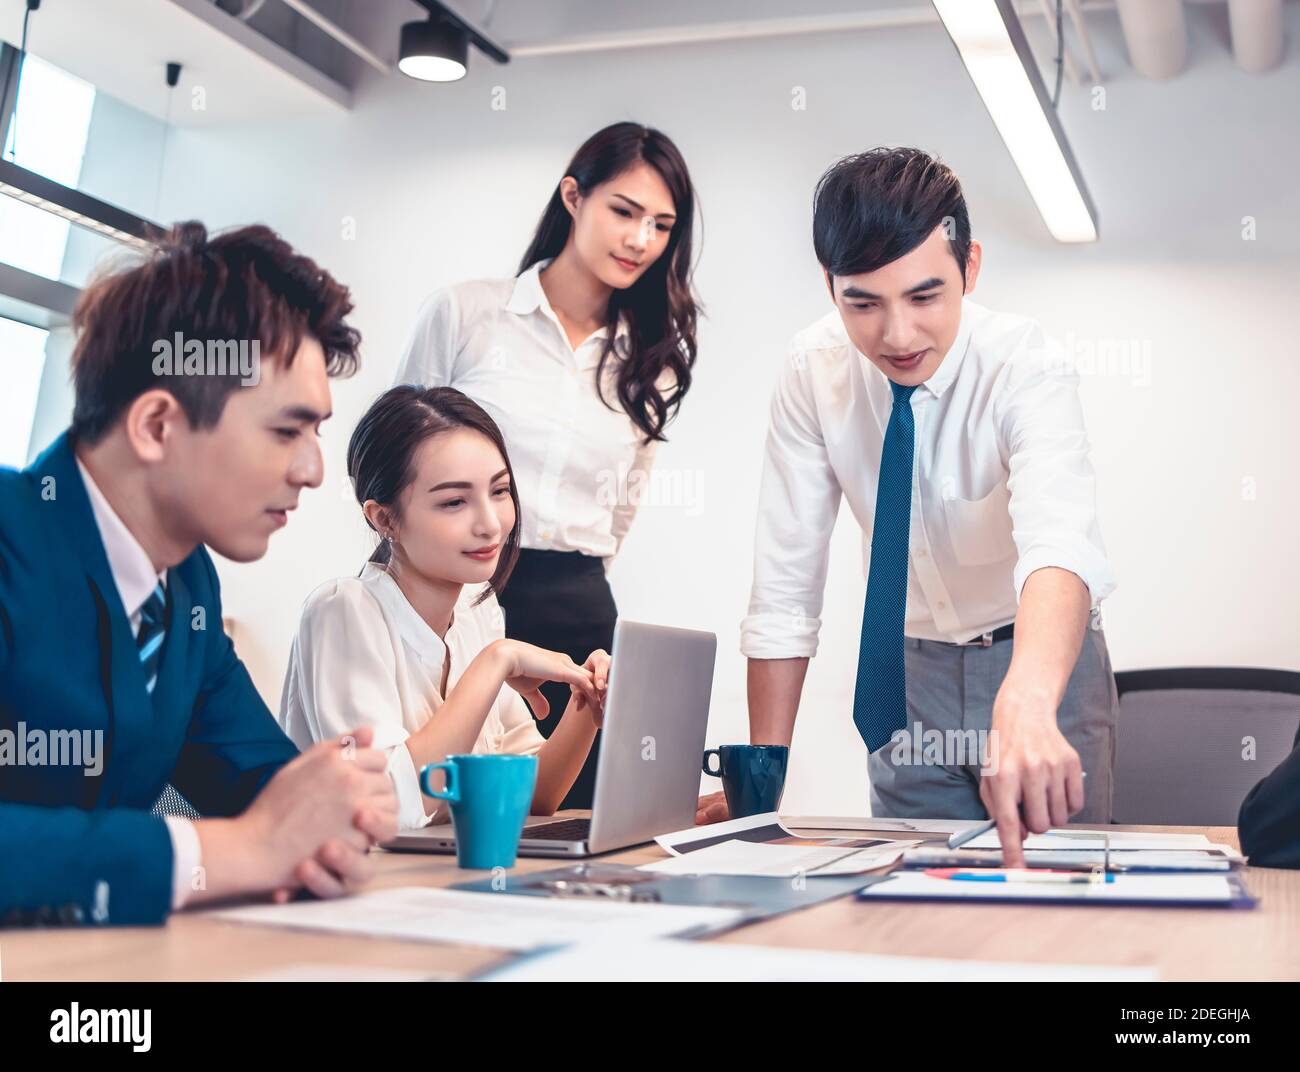 Corporate business team and manager in meeting Stock Photo